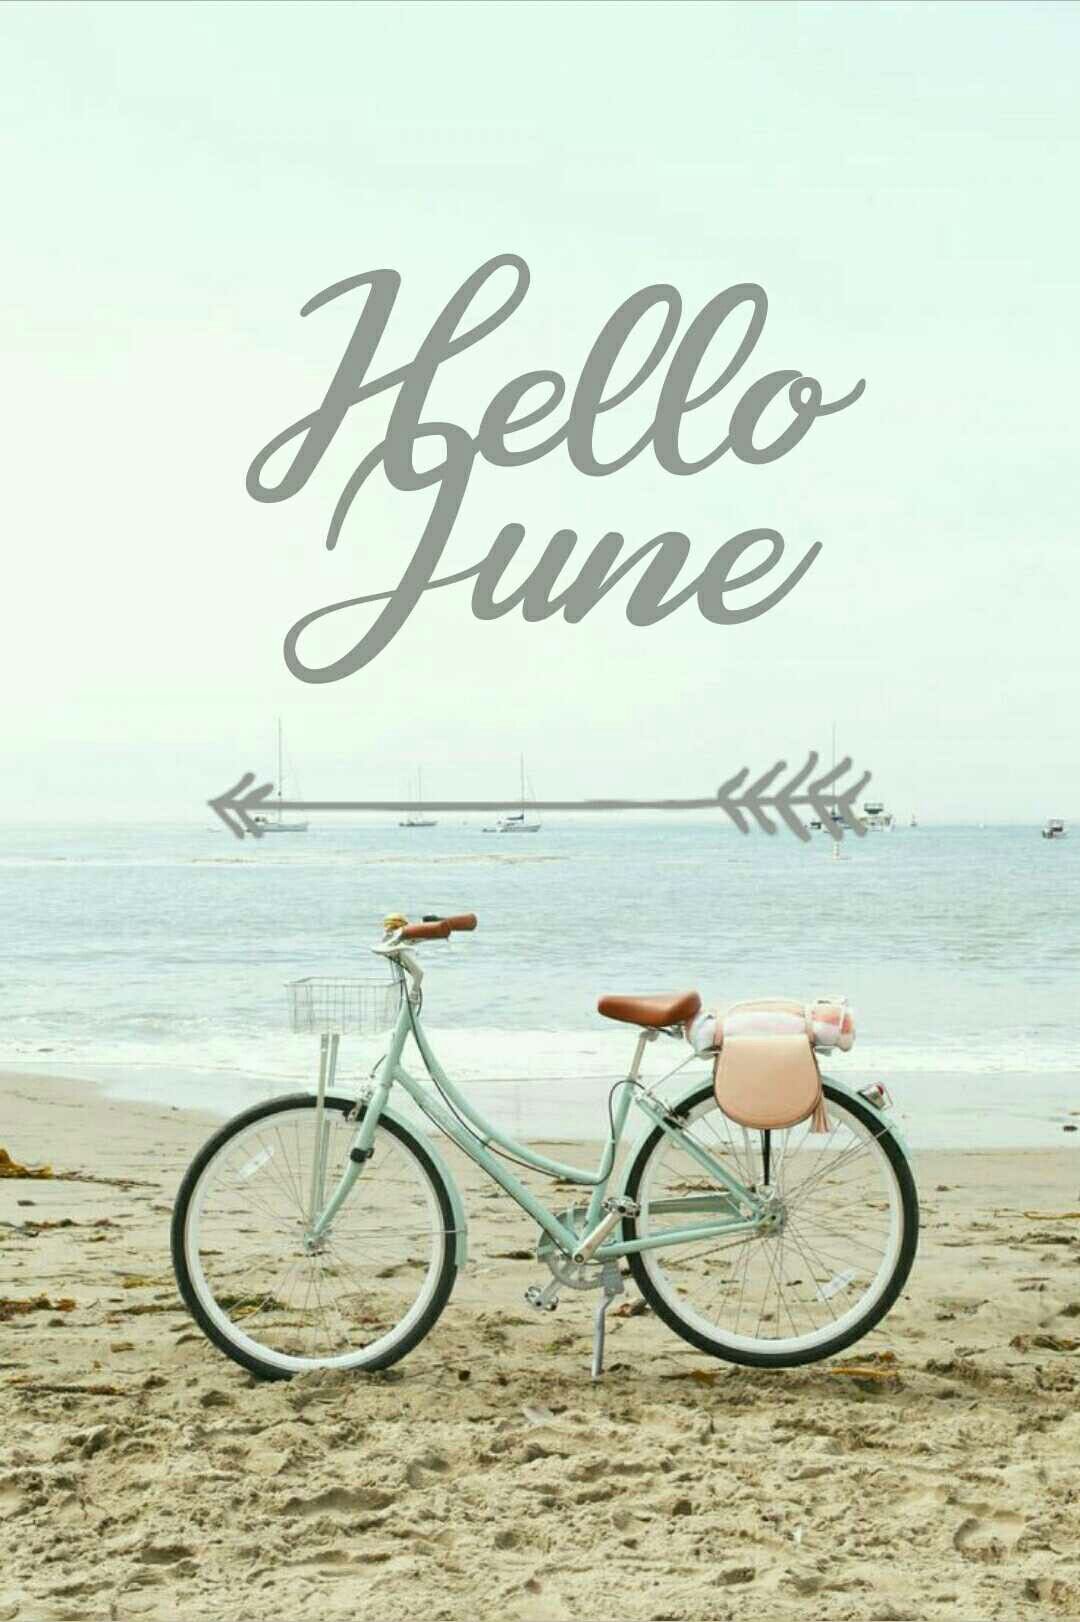 Hello June Wallpaper Discover more 31 Days, Beach, Beatiful, Cute, Hello June wallpaper.. Hello june, Seasons months, New month greetings